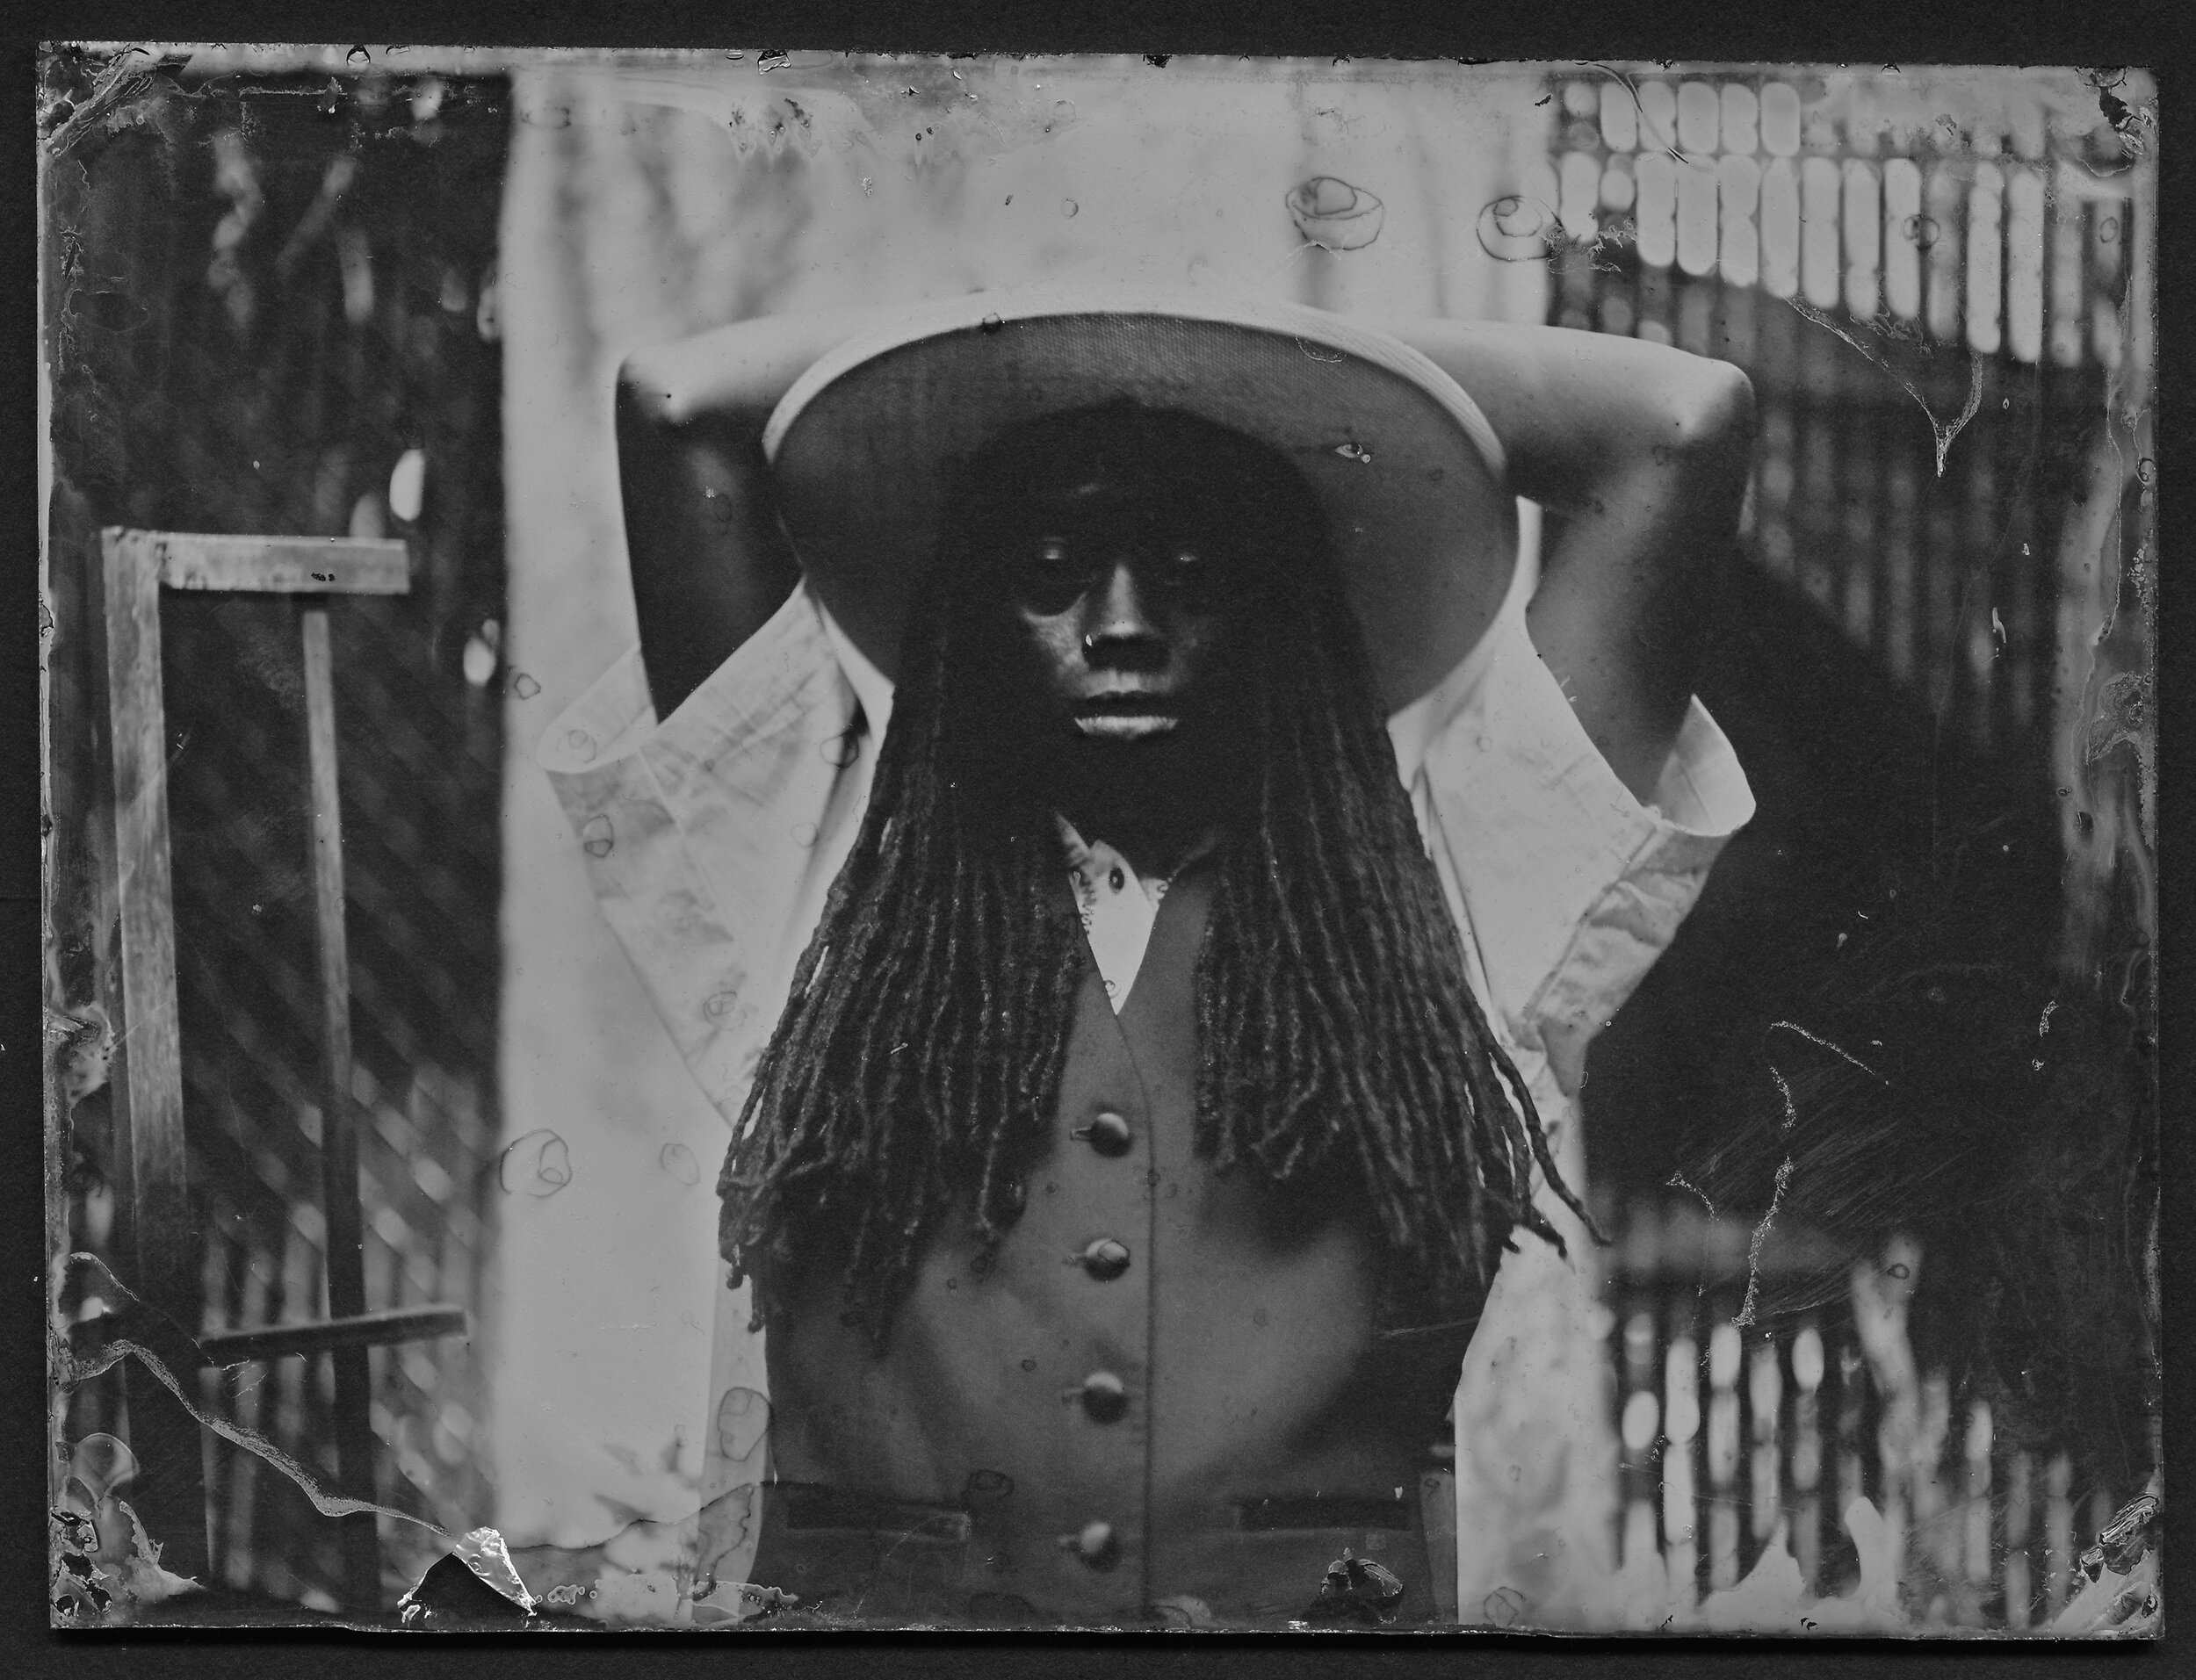 Jean with hands up, 2019, Ambrotype